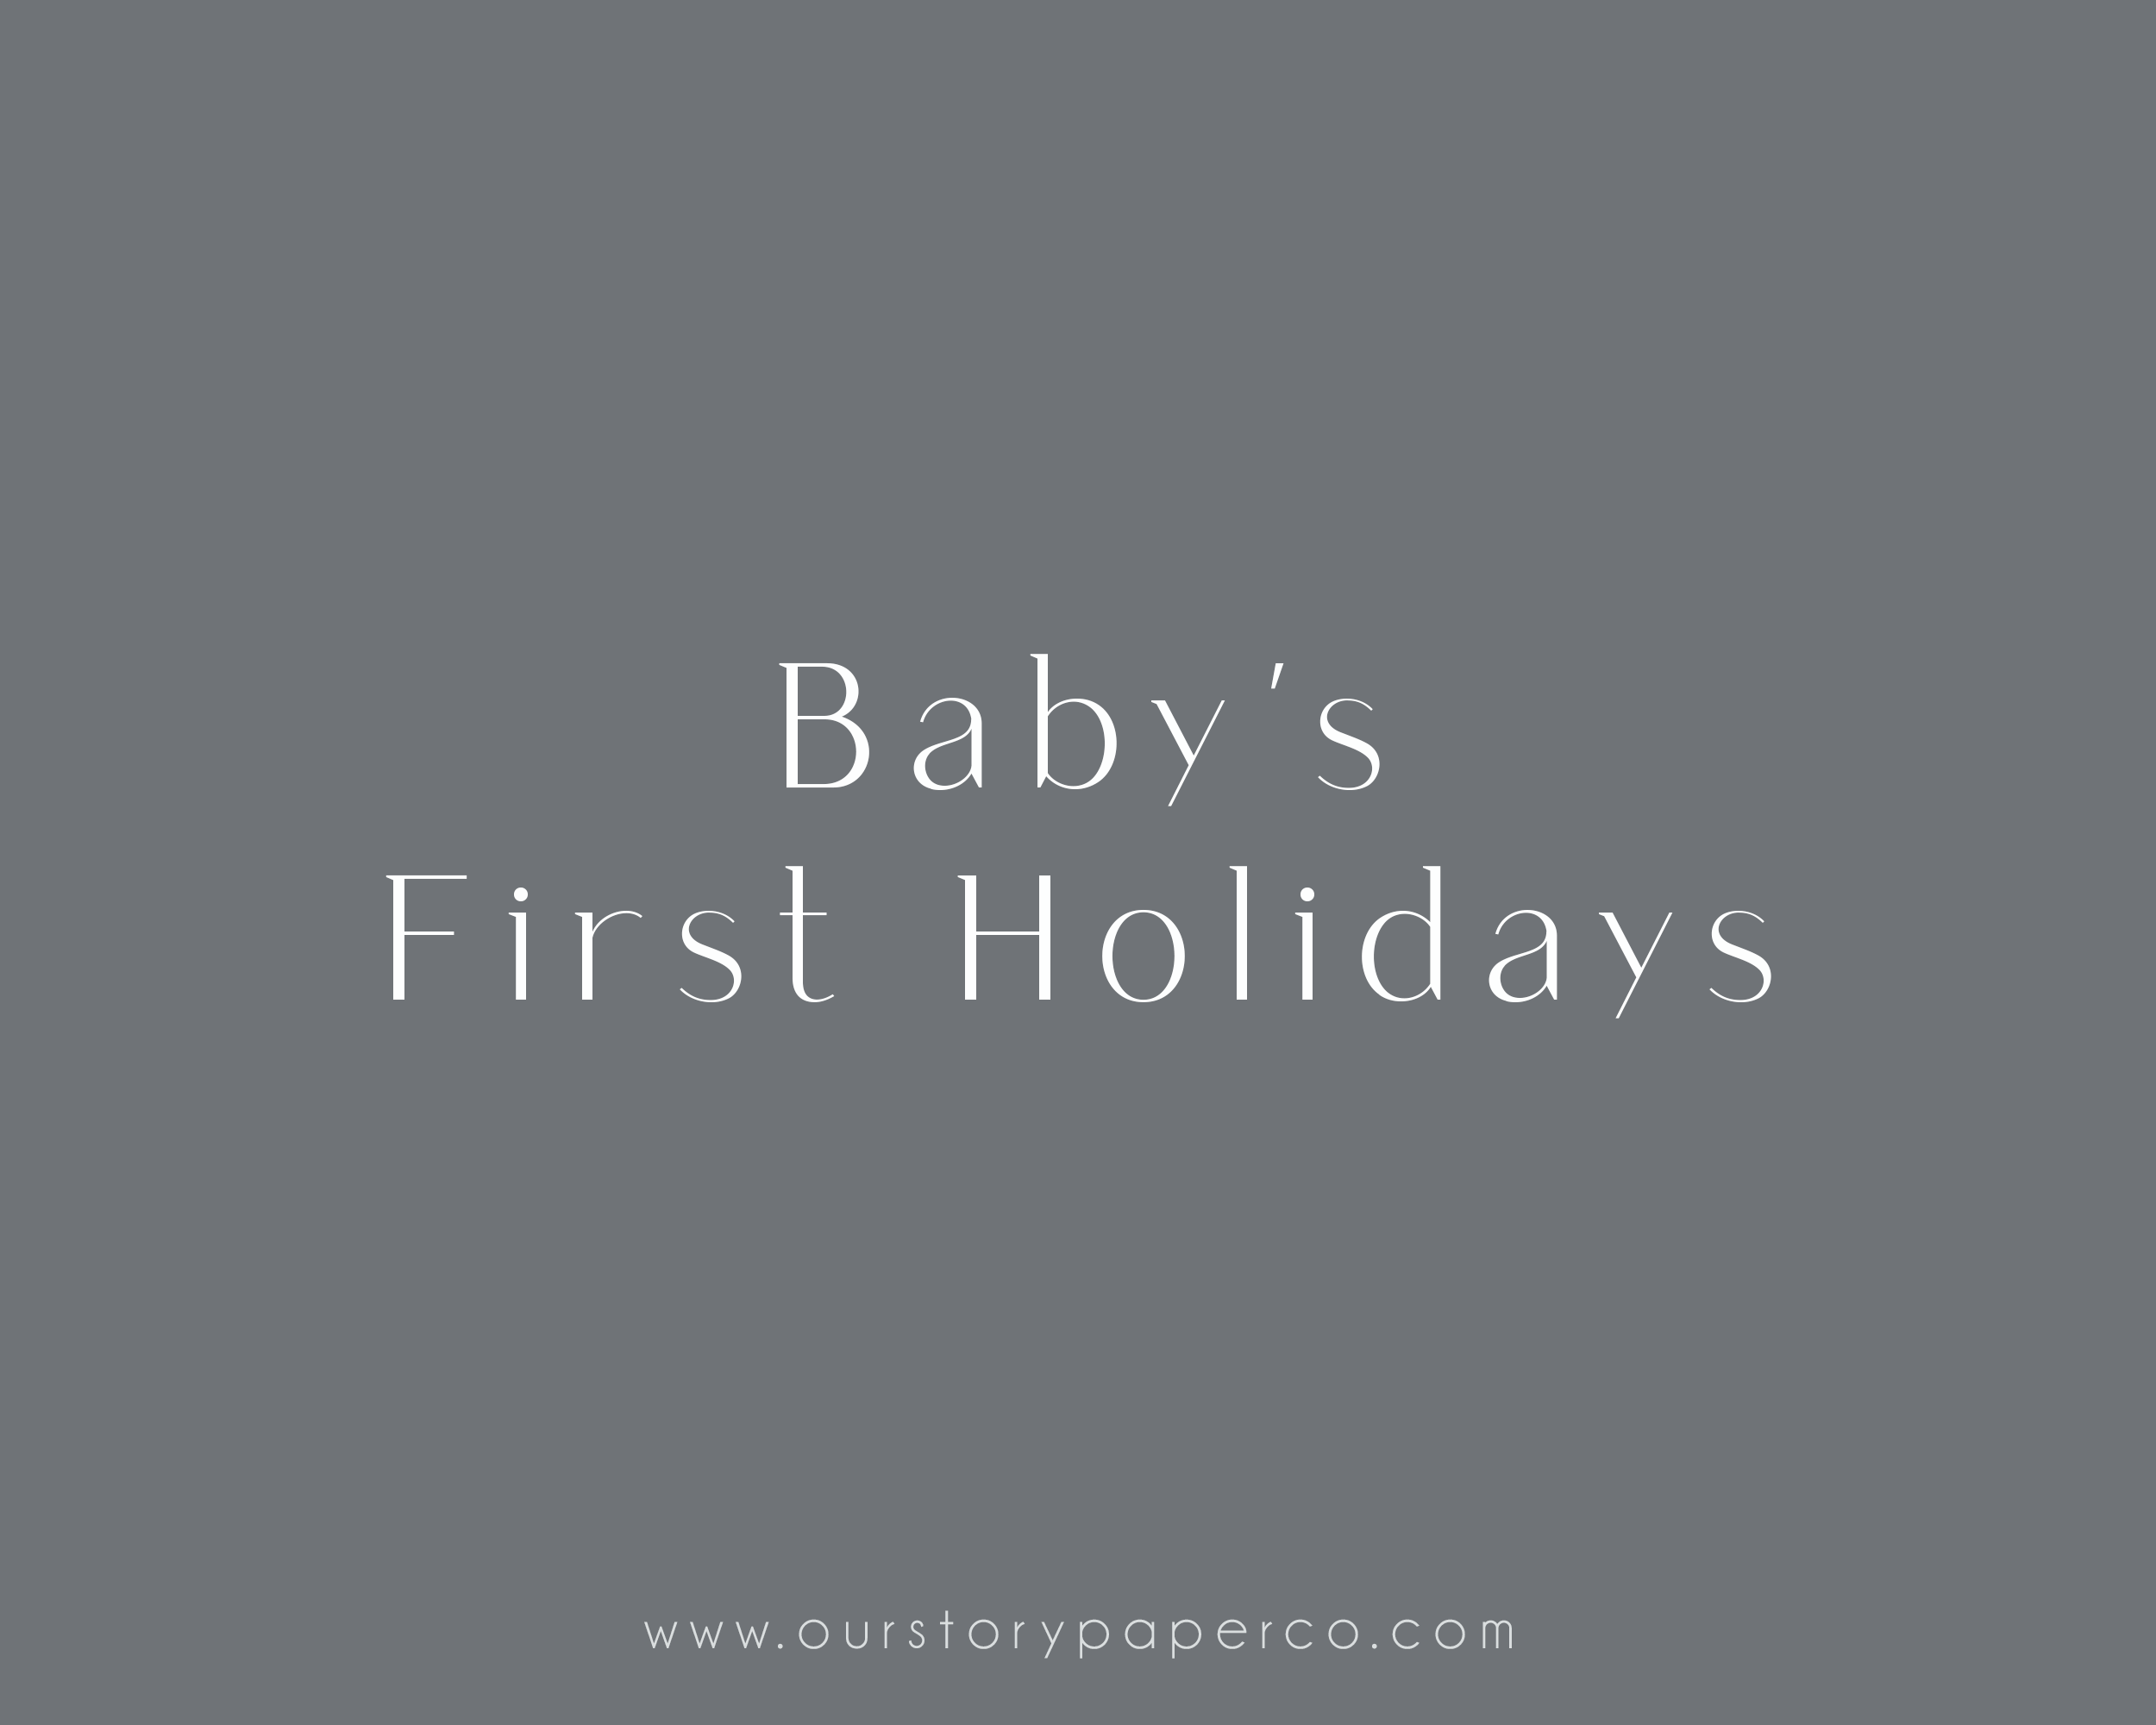 Baby's First Holidays - Our Story Paper Co.